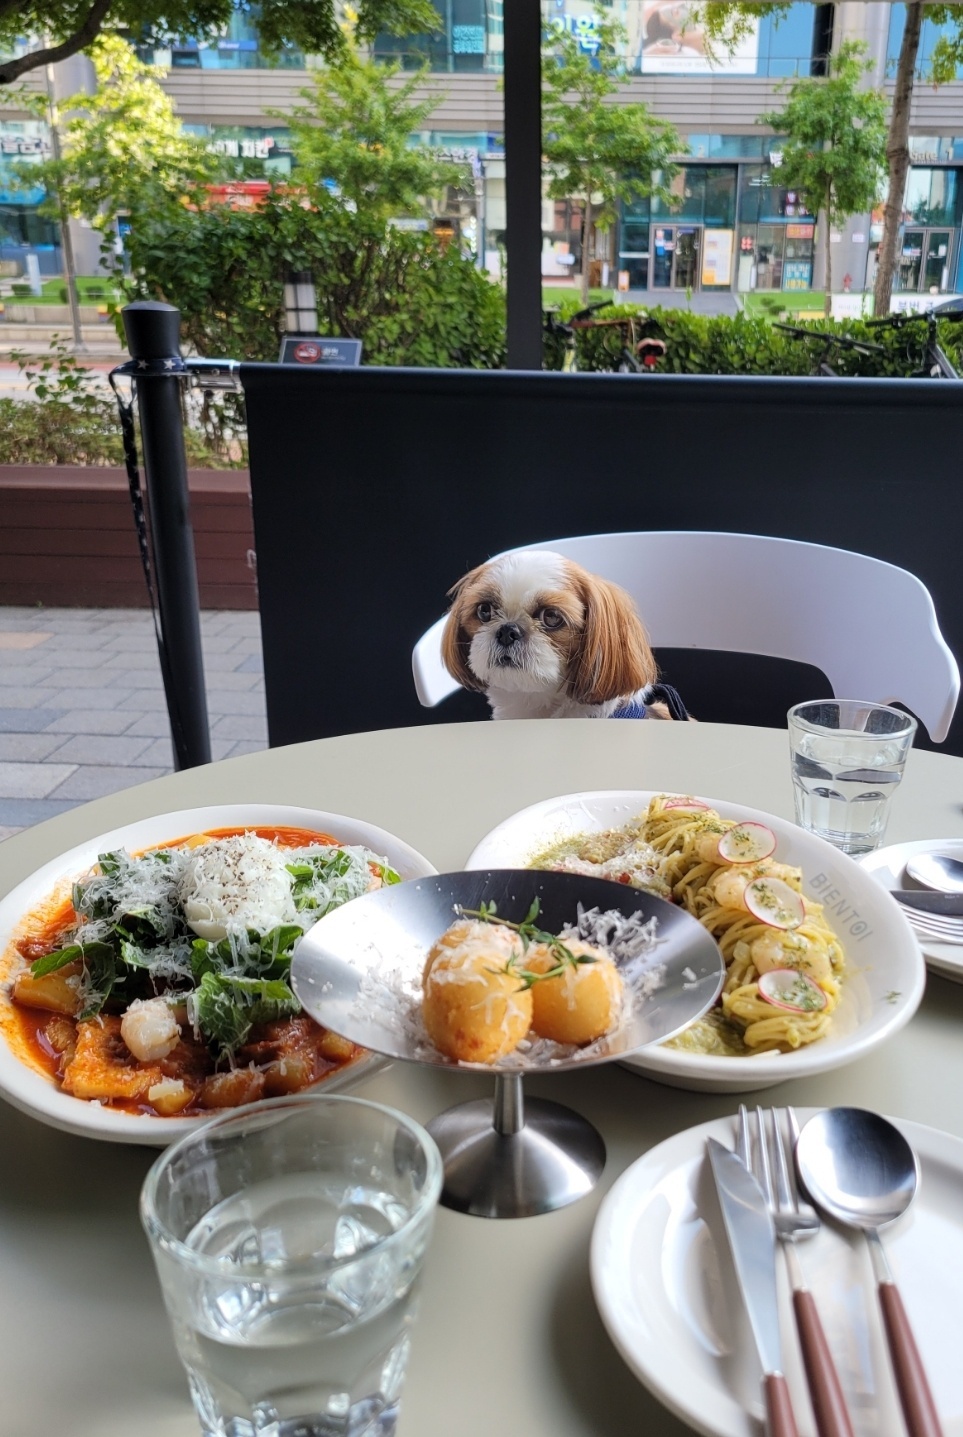 A Shih Tzu sits with its owners outside Bientoi, a brunch restaurant in Pangyo, Gyeonggi Province, on June 17. (Park Yuna/The Korea Herald)